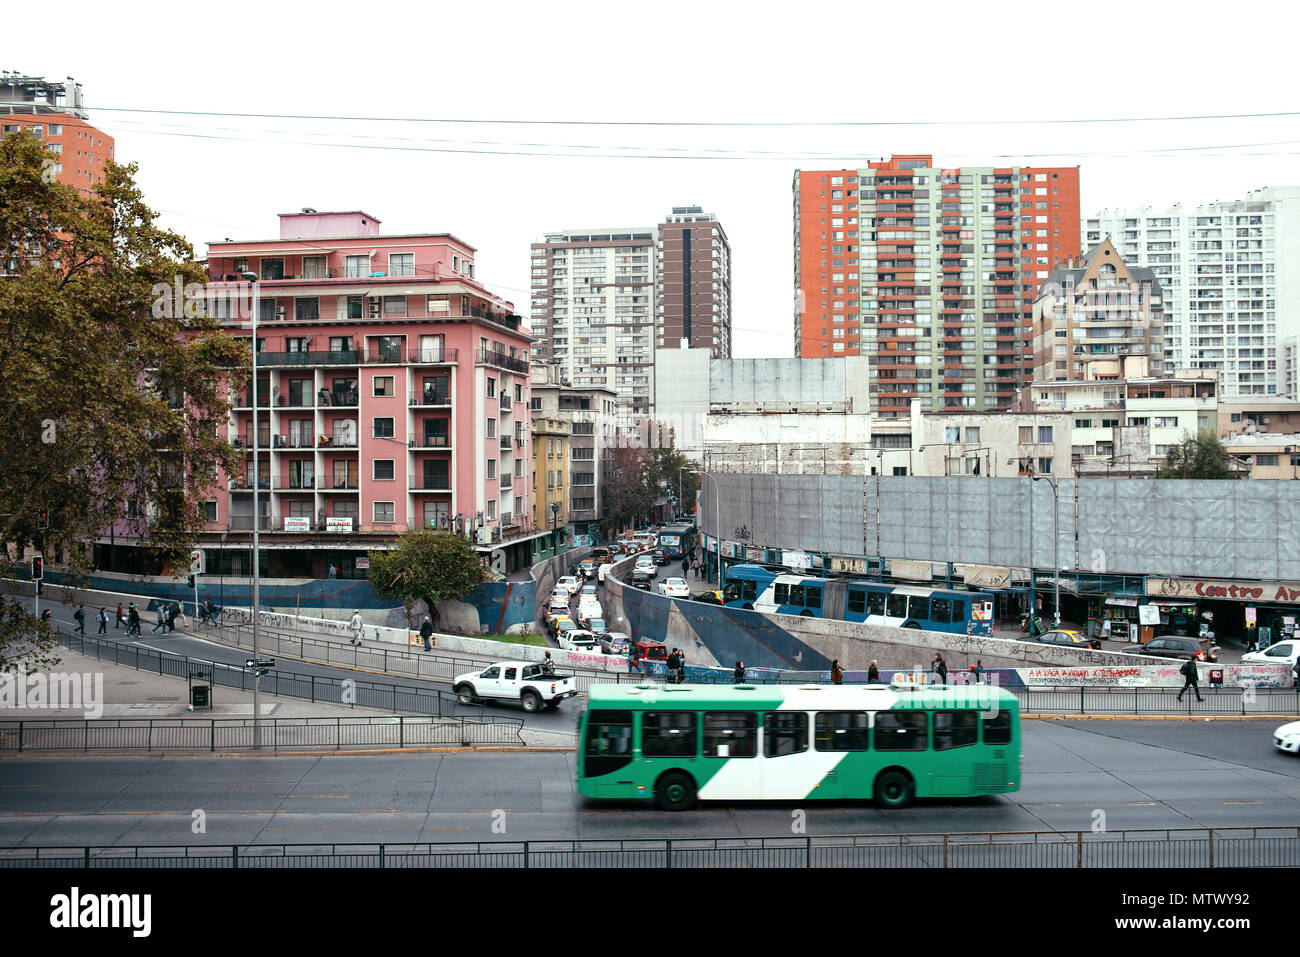 Enel technology electric bus: Metbus public transportation. View of central Santiago from Santa Lucia hill, Santiago, Chile. May 2018 Stock Photo